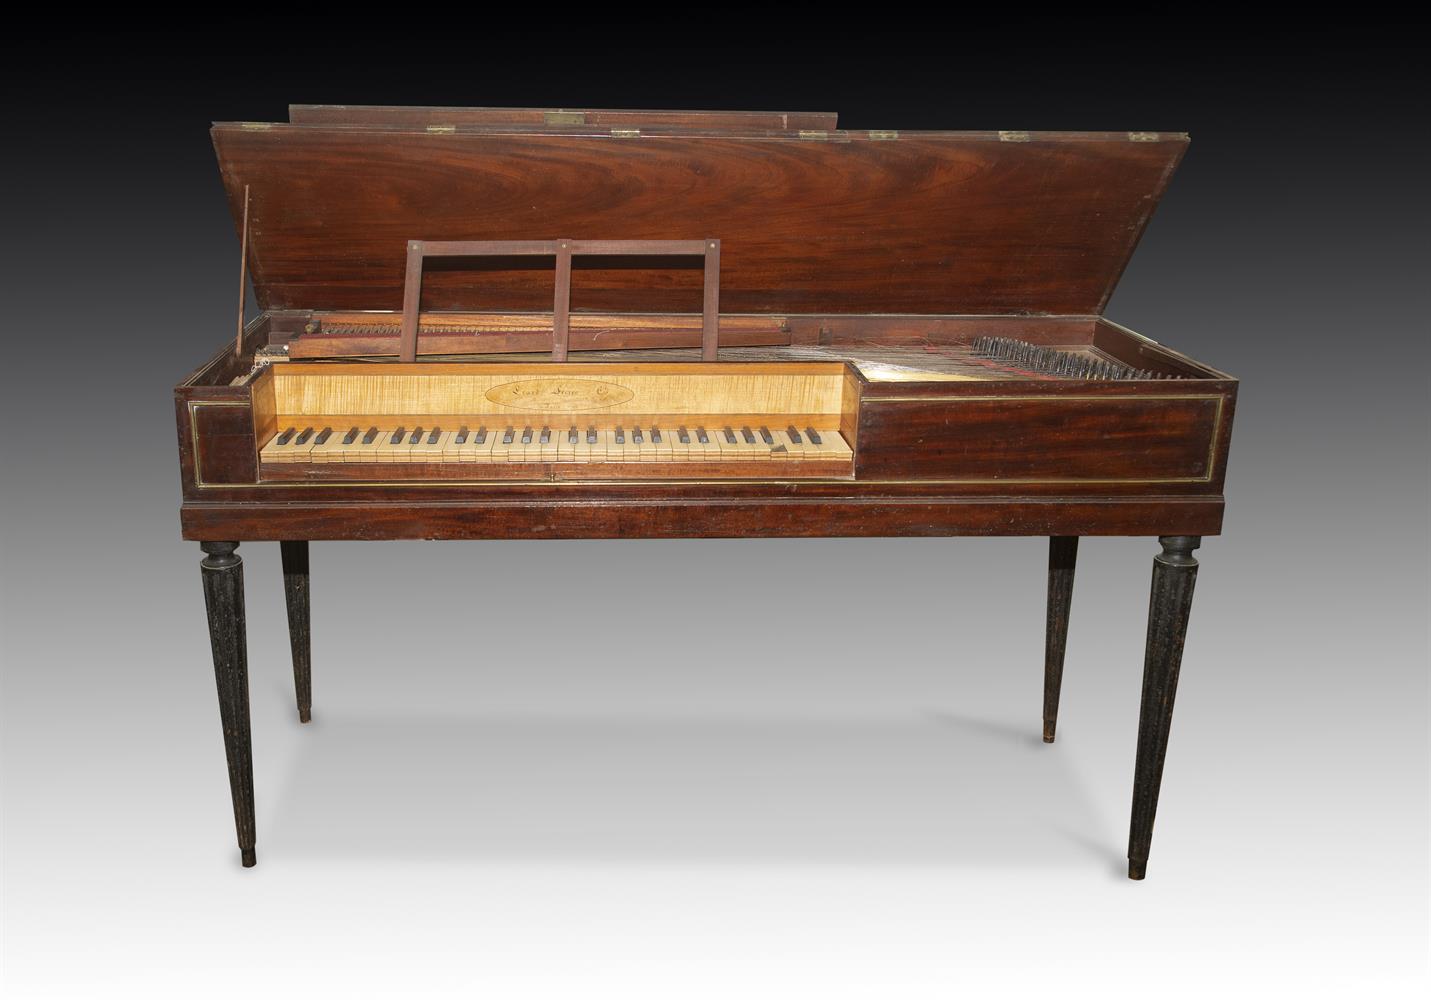 Y† ERARD, PARIS; A 5 OCTAVE FF- F3 EARLY SQUARE PIANO, 1798, NUMBER 3915